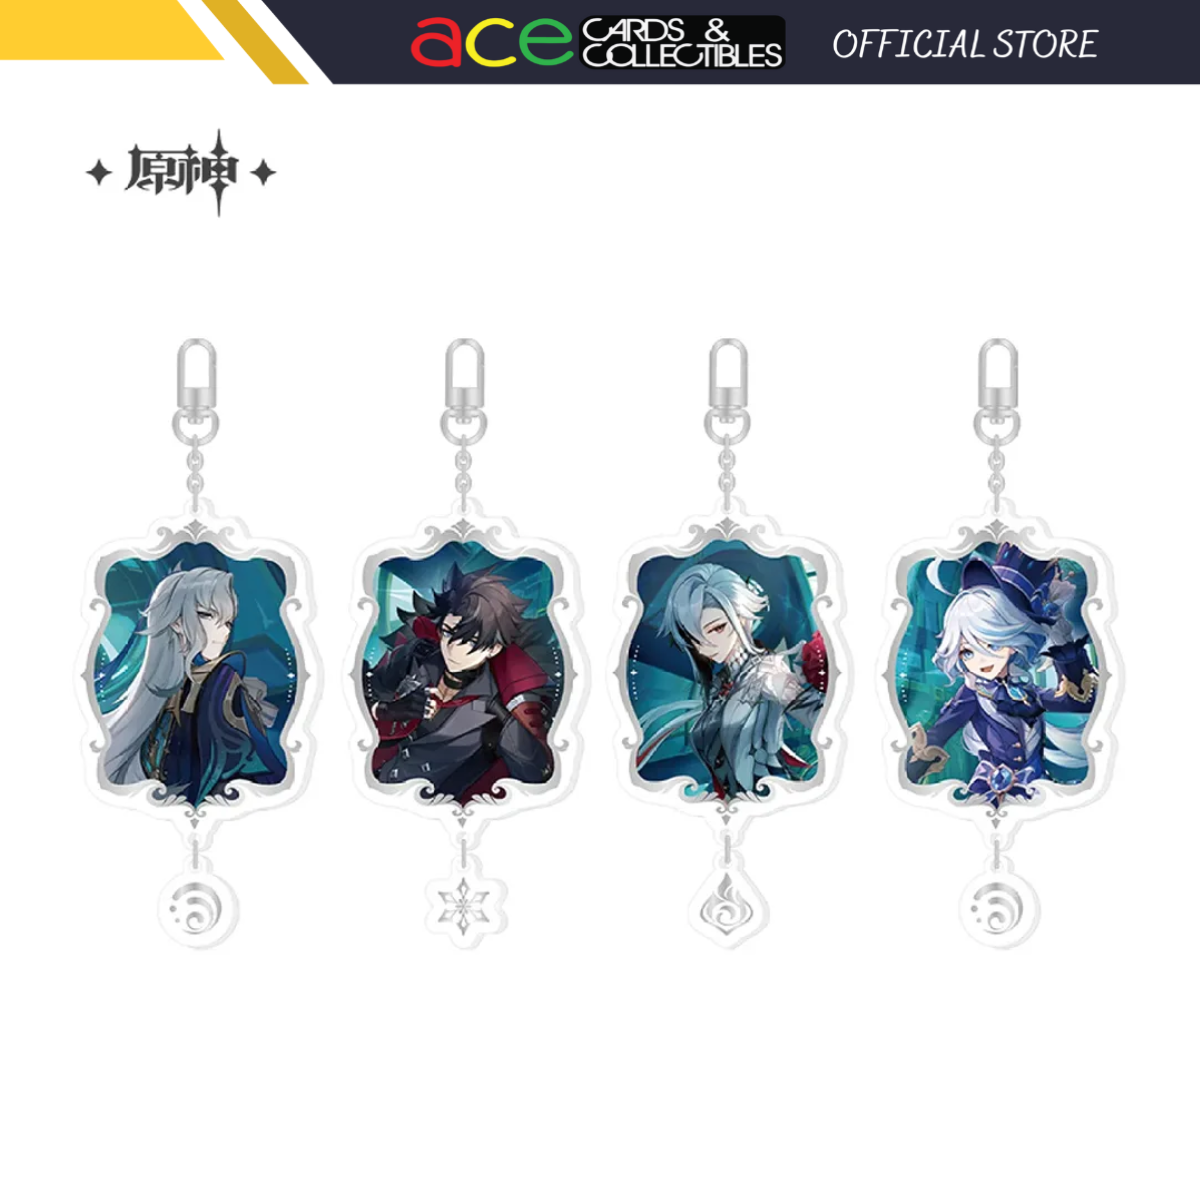 miHoYo Genshin Impact "To the Stars Shining in the Depths" Character Keychain-Neuvillette-miHoYo-Ace Cards & Collectibles